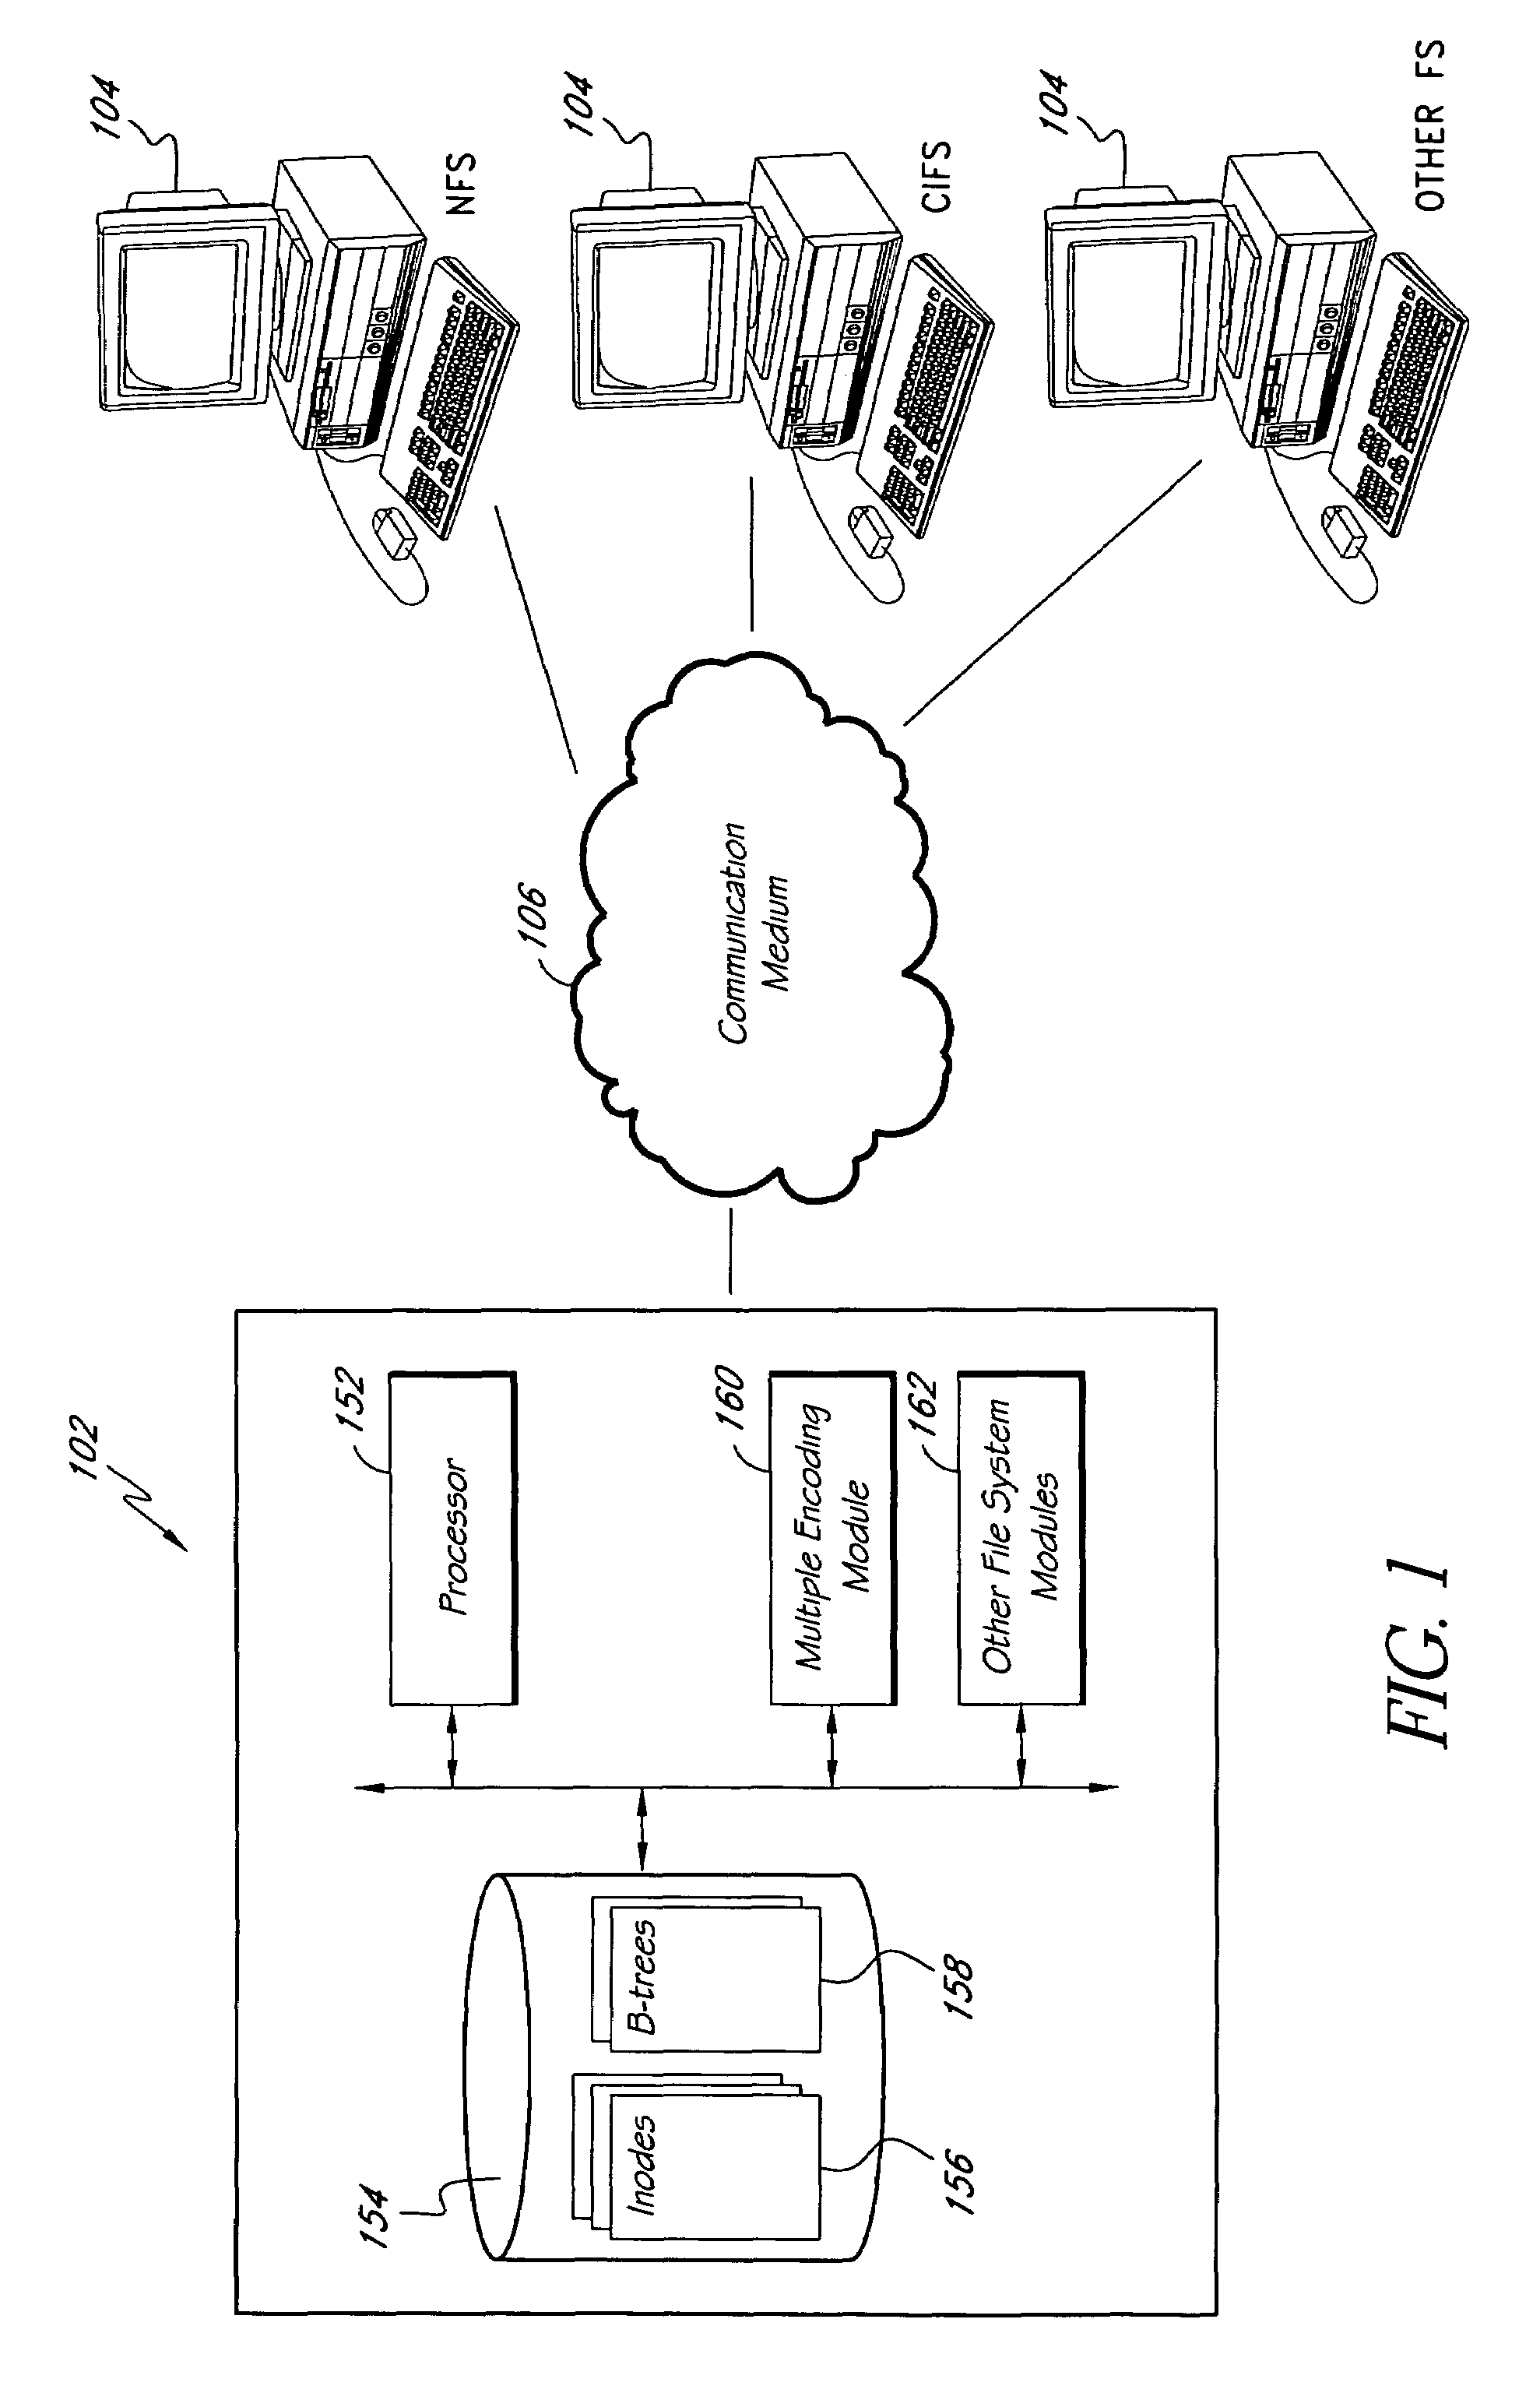 Systems and methods of directory entry encodings